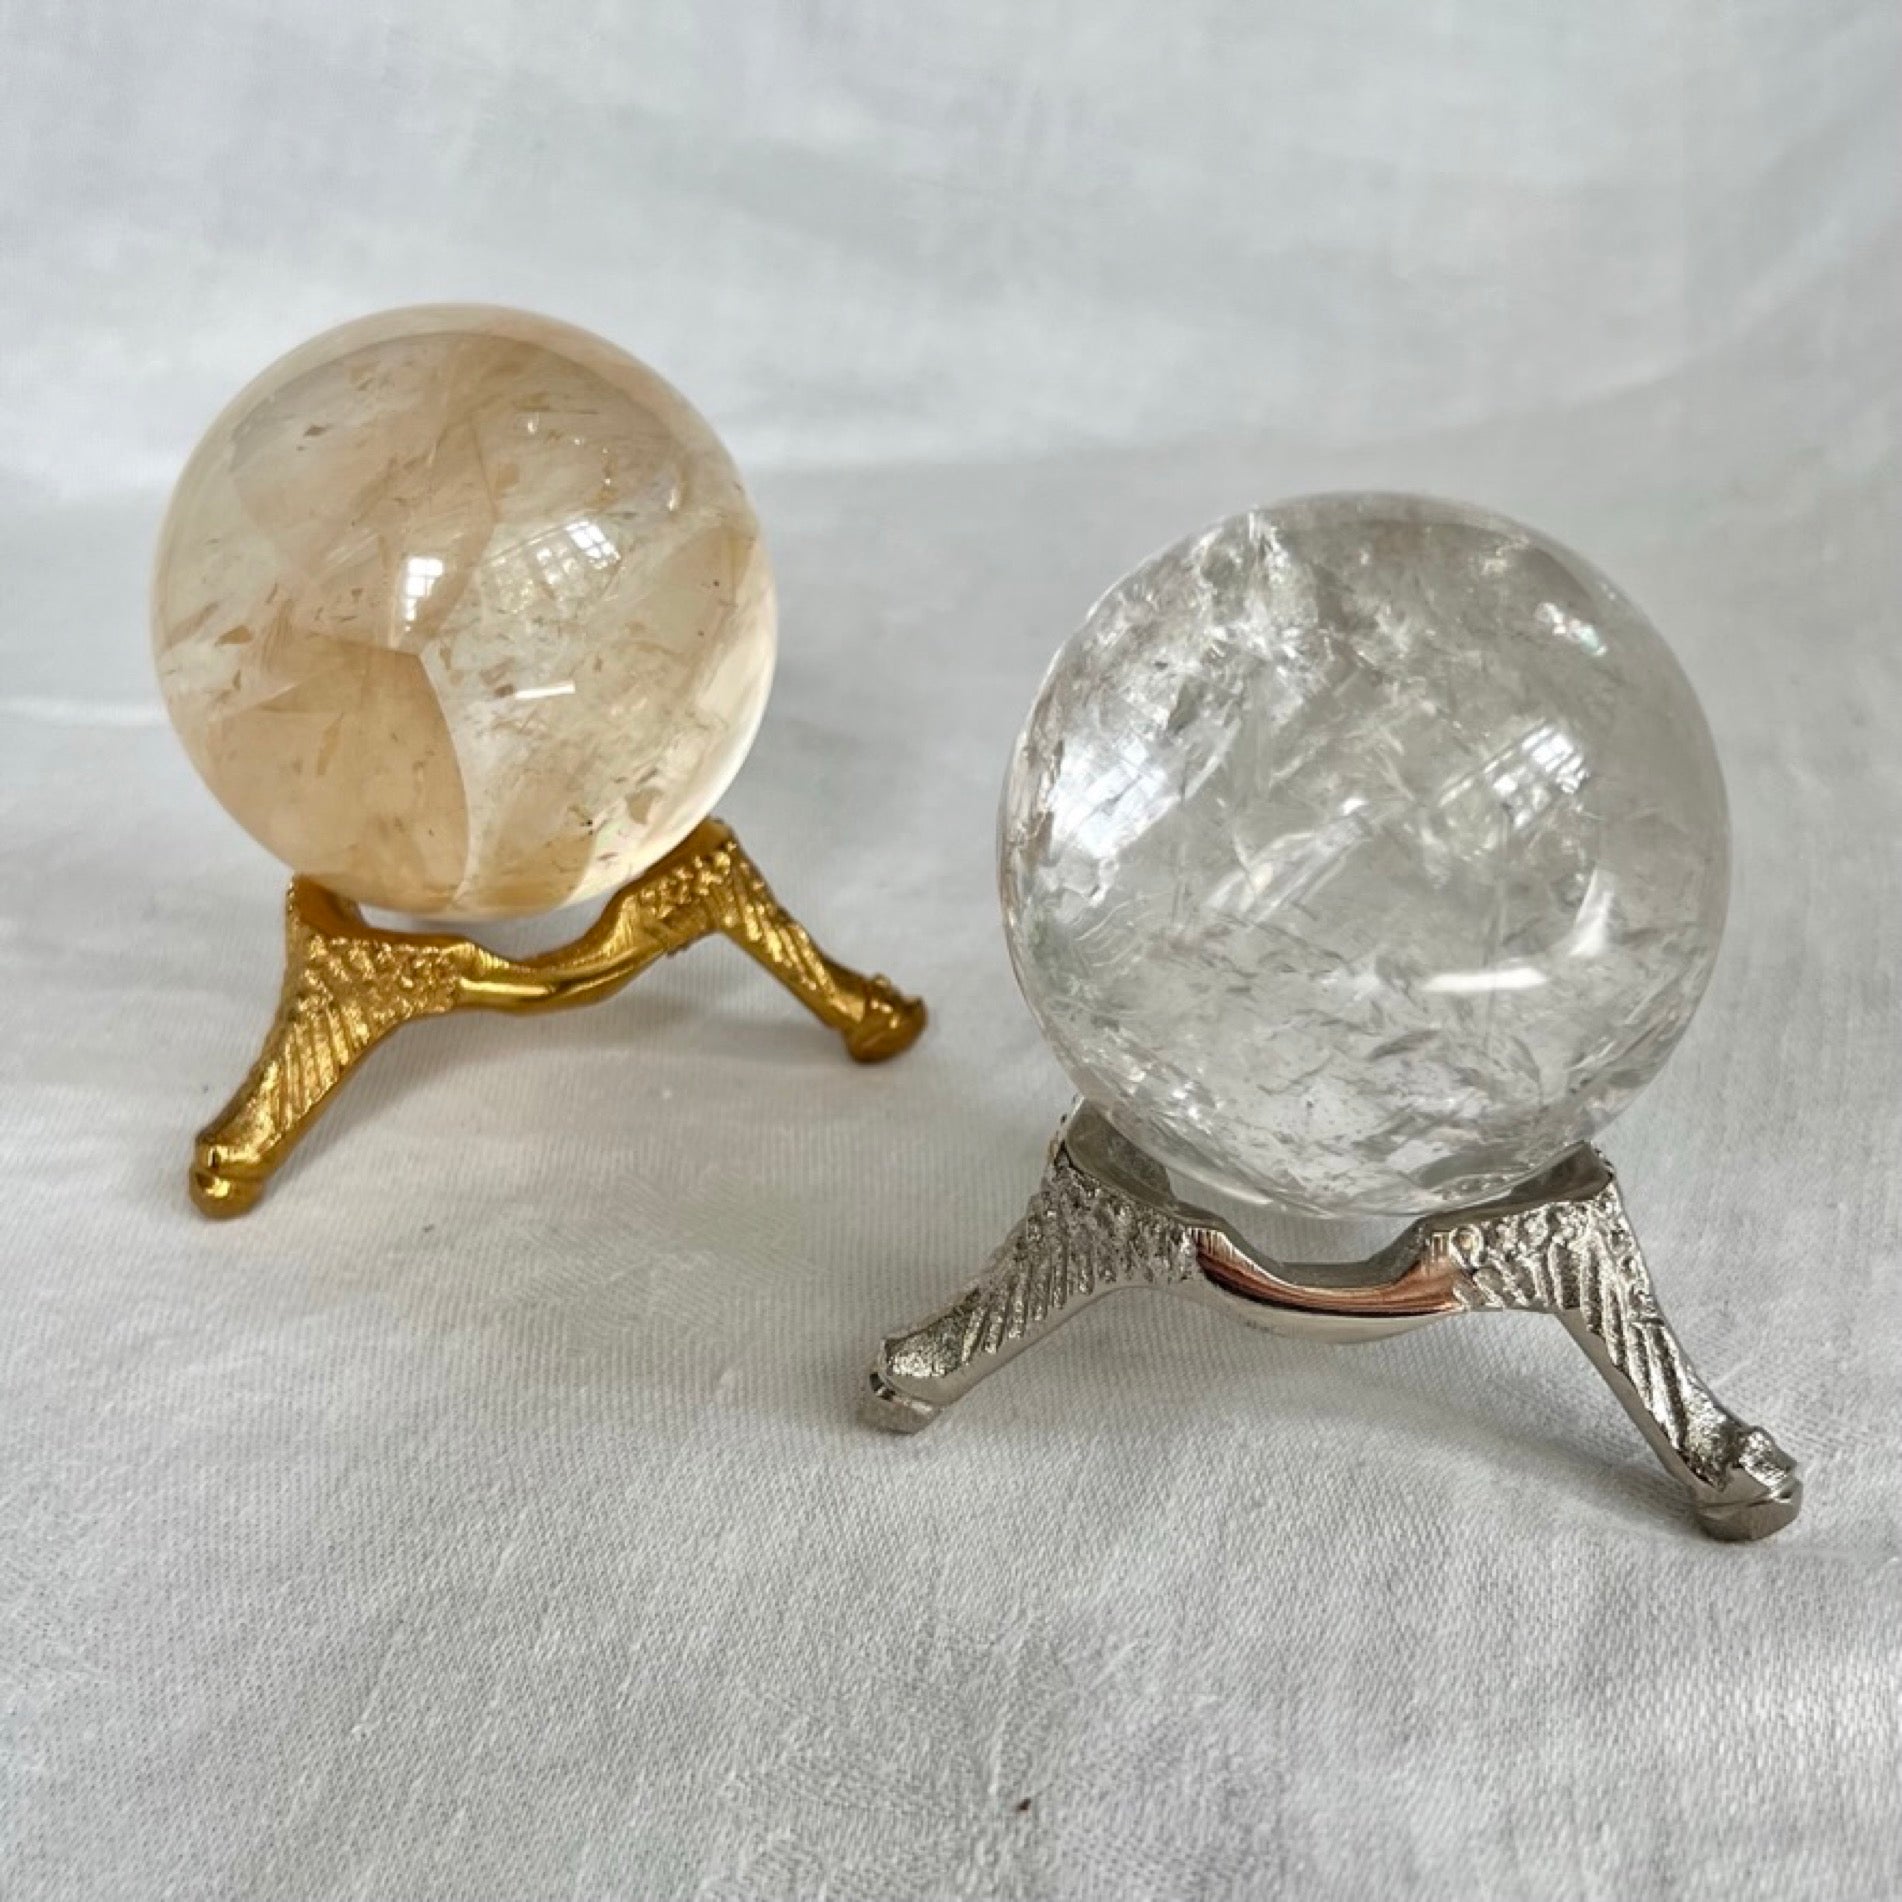 Silver nickel and gold vintage style small crystal sphere holders with crystal balls